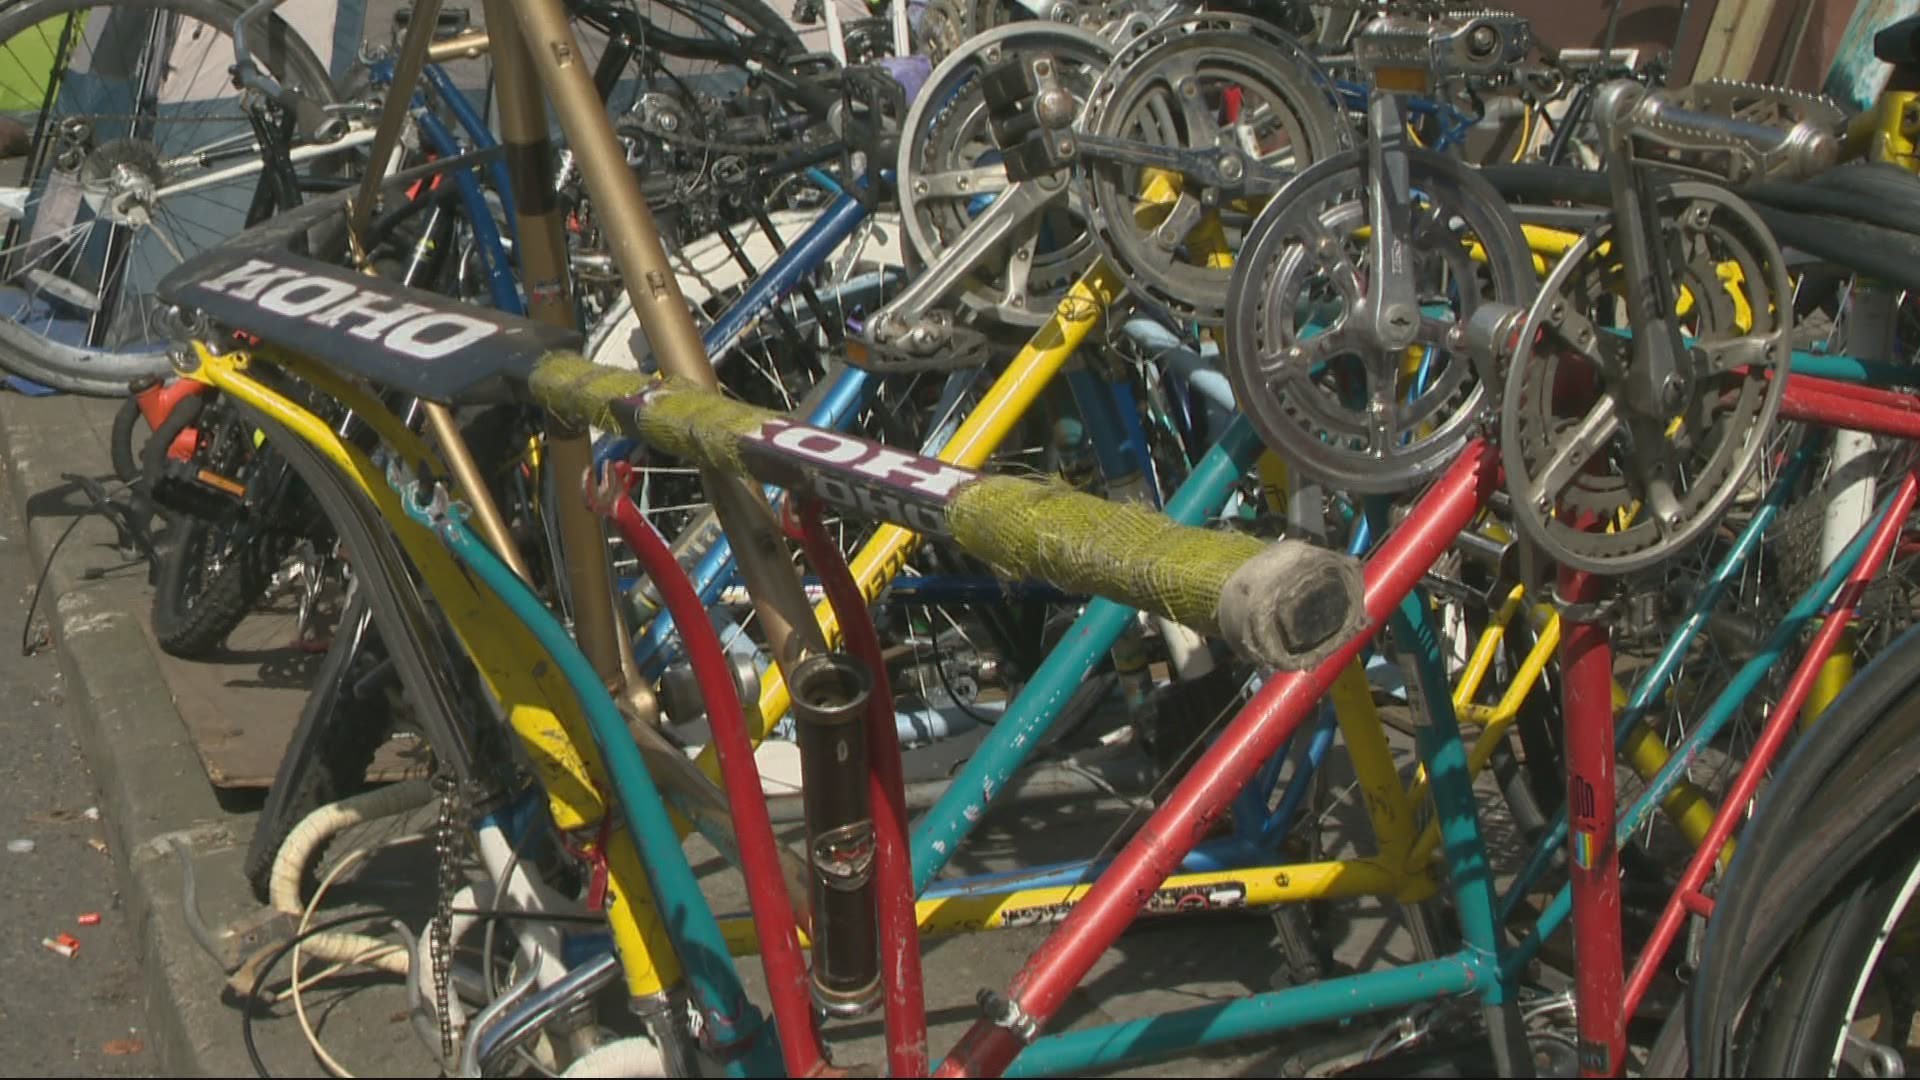 With reductions in budget and personnel, the Bike Theft Task Force is not currently operating.